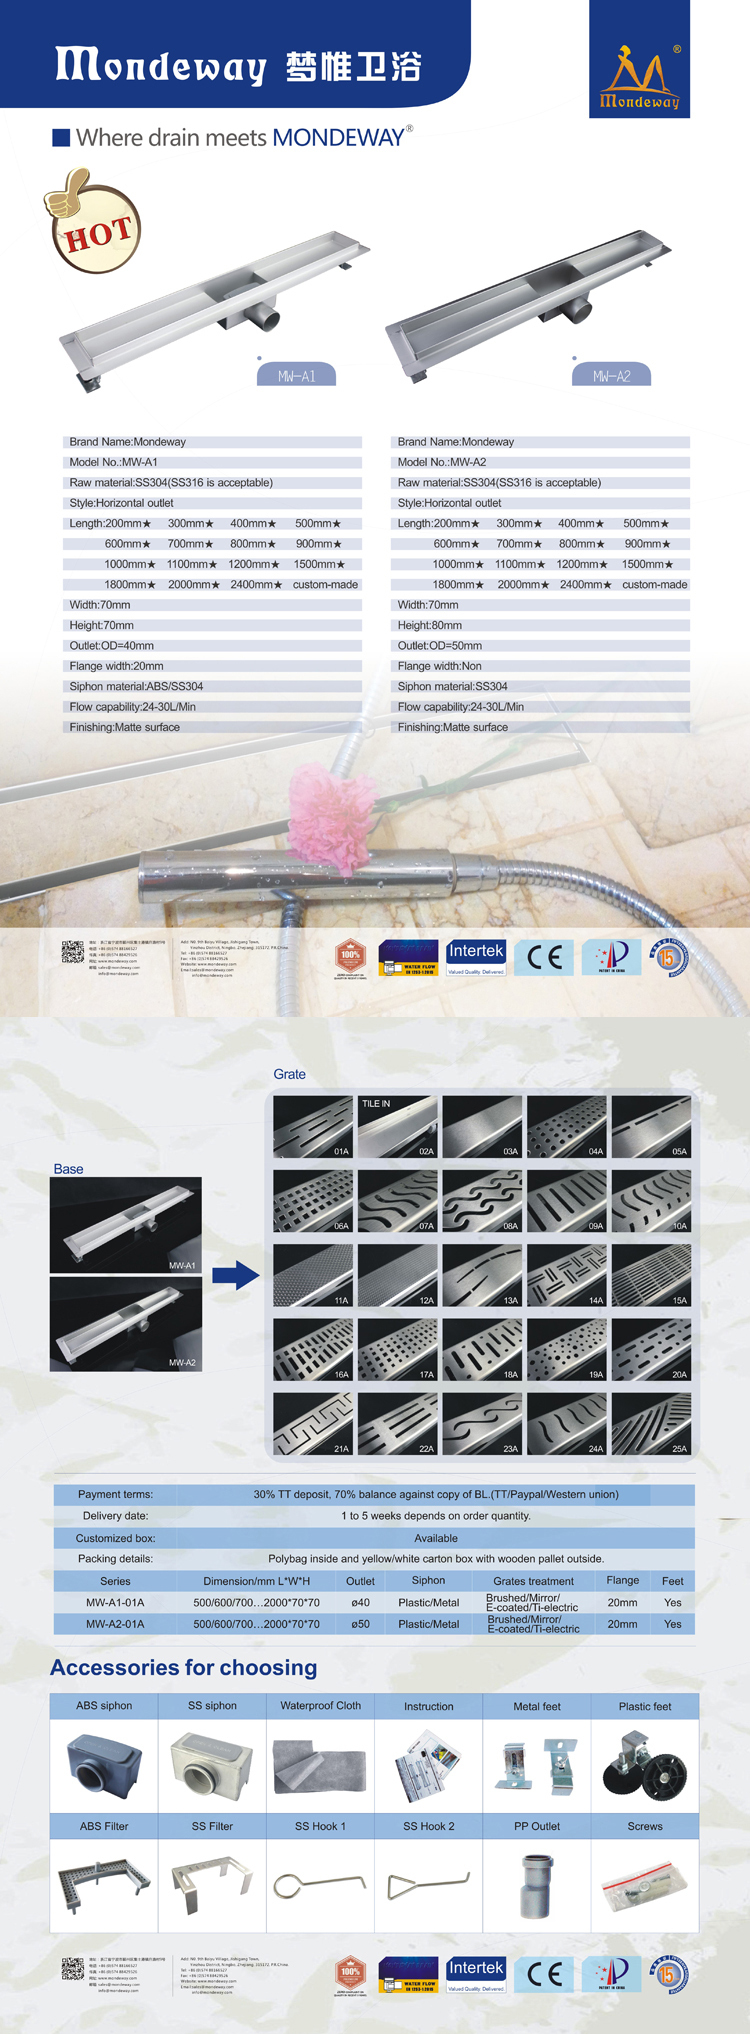 New design bathroom stainless steel drains/Stainless Steel Outdoor/Indoor Floor Trap Drains Linear Shower Drains with mondeway